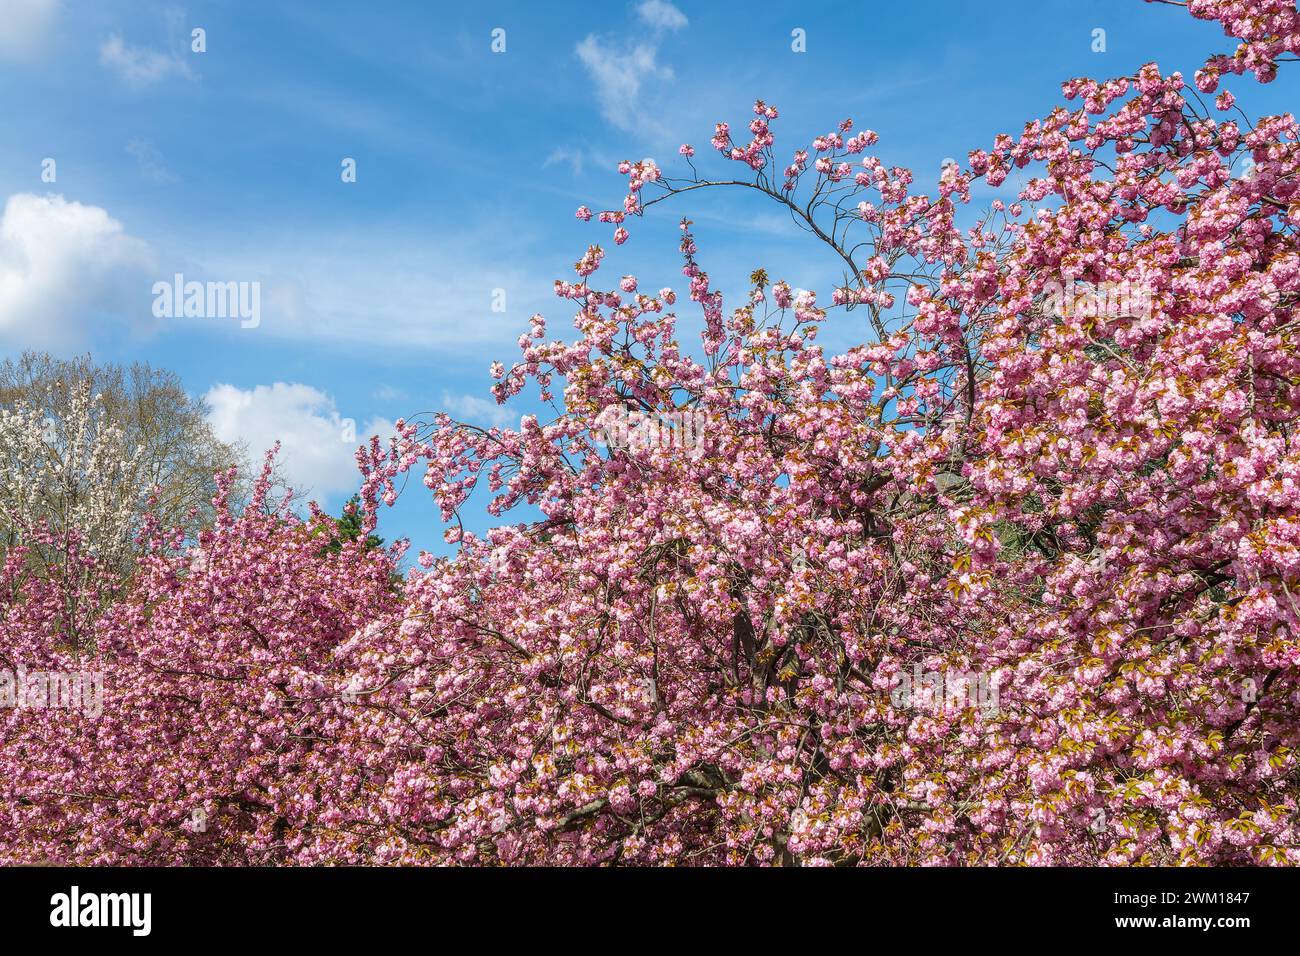 Pink cherry blossom in a cherry orchard with many trees in bloom in spring, hanami season in Japan Stock Photo